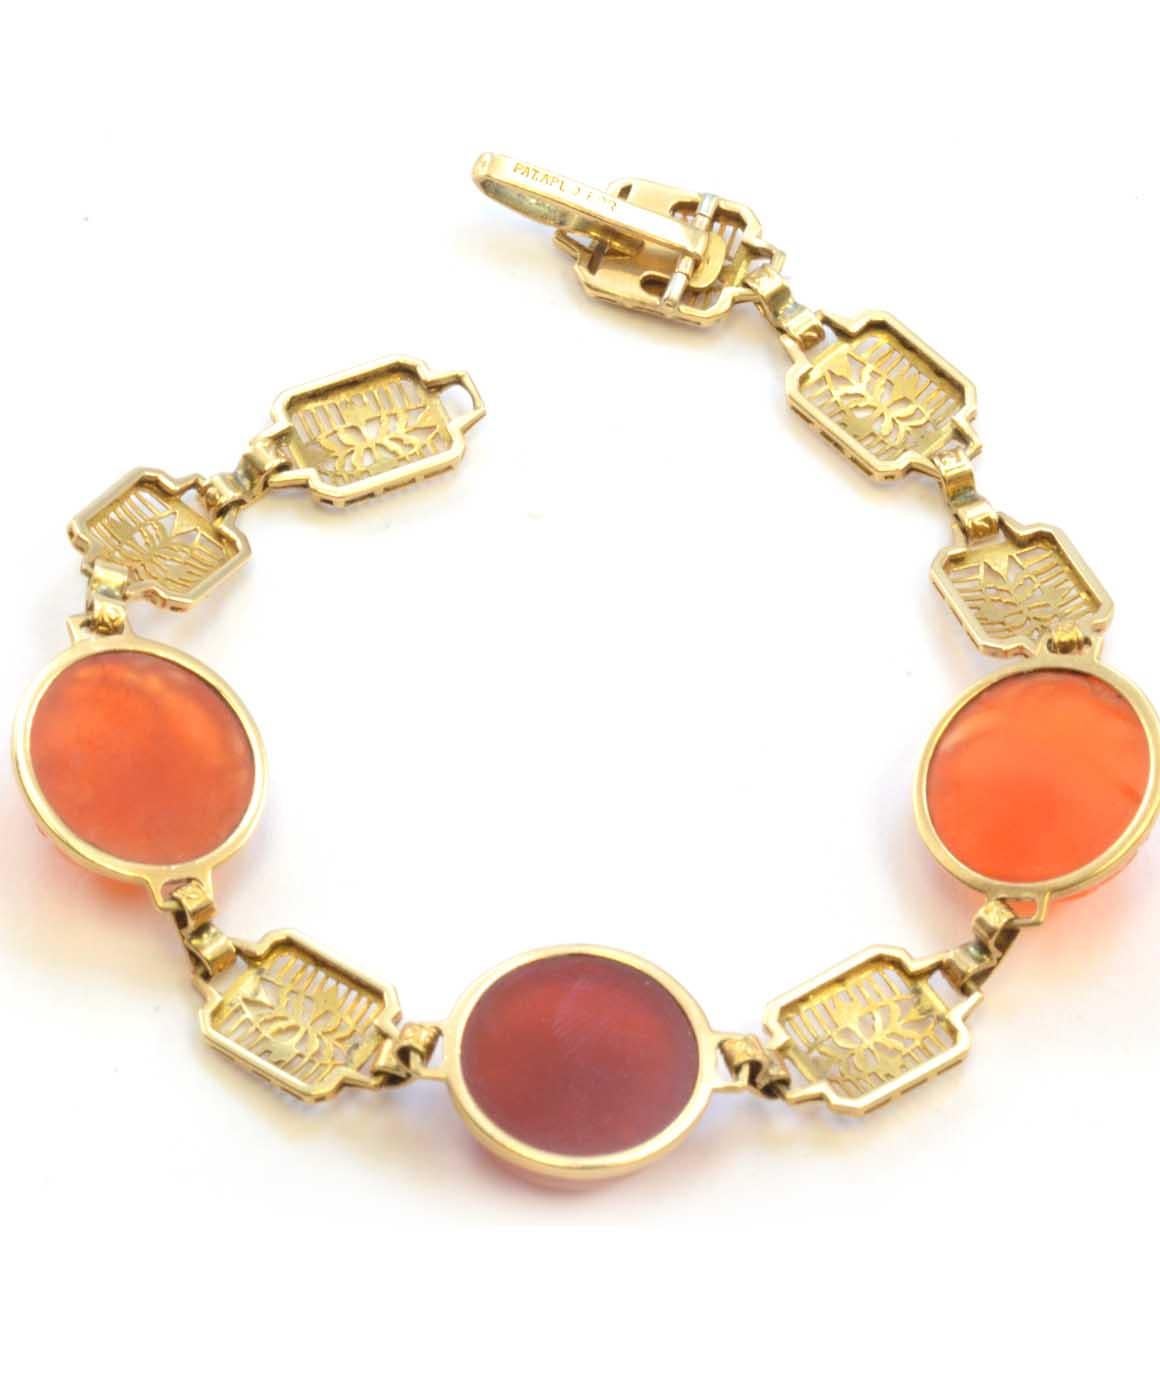 Solid 14K Yellow Gold Cabochon & Carved Genuine Carnelian Bracelet 11.0g
Excellent condition. This solid 14k yellow gold bracelet features 3 genuine carnelian stones,  measuring about 13.57mm. The bracelet measures 7 inches and weighs 11.0 grams.